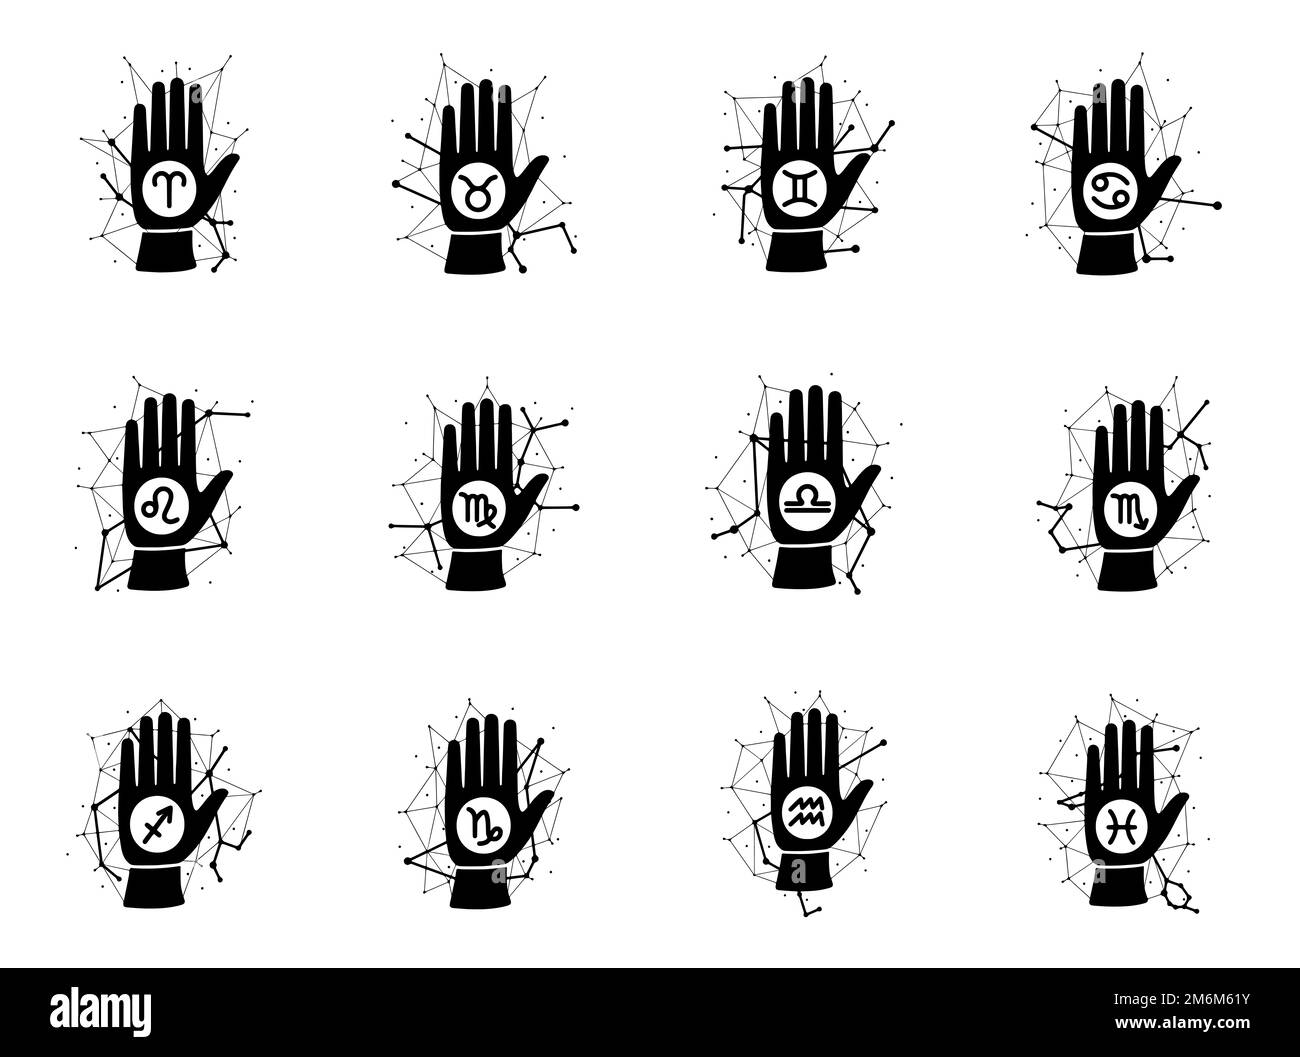 Hand with zodiac signs and constellation doodle design. Horoscope fortune telling concept artwork. Stock Photo